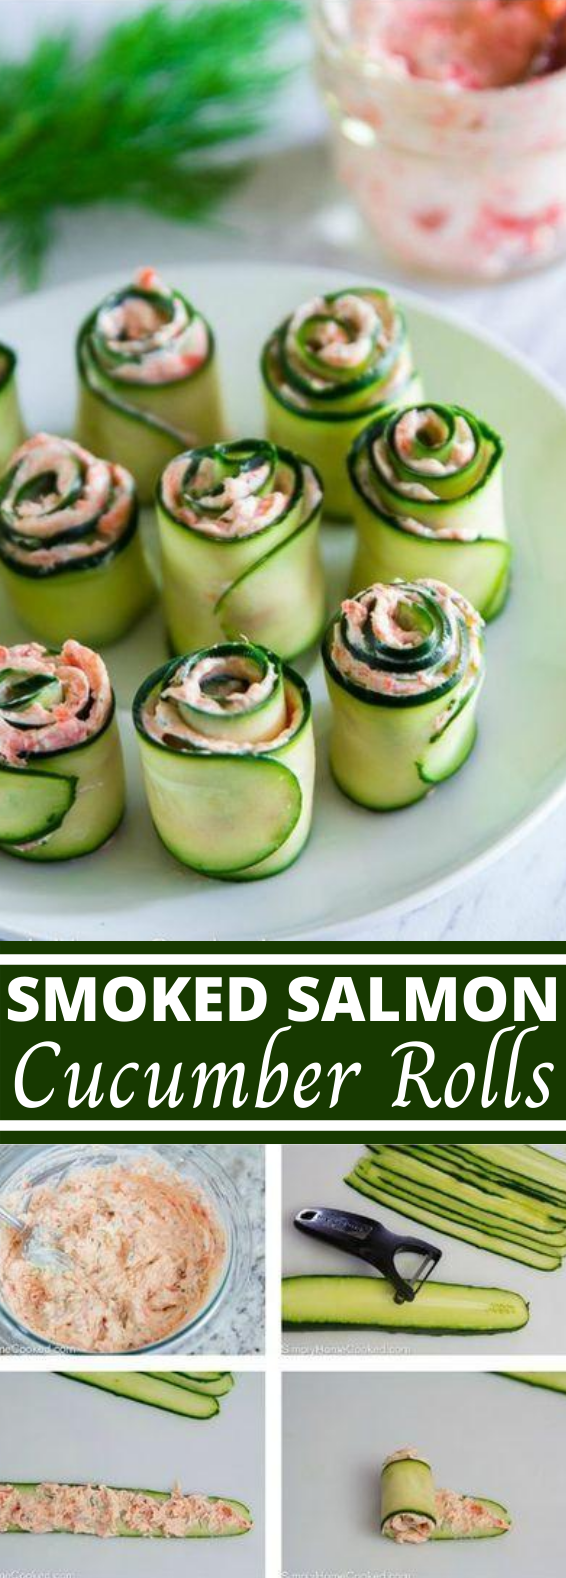 Smoked Salmon Cucumber Appetizer #easy #healthy #glutenfree #lowcarb #fingerfood